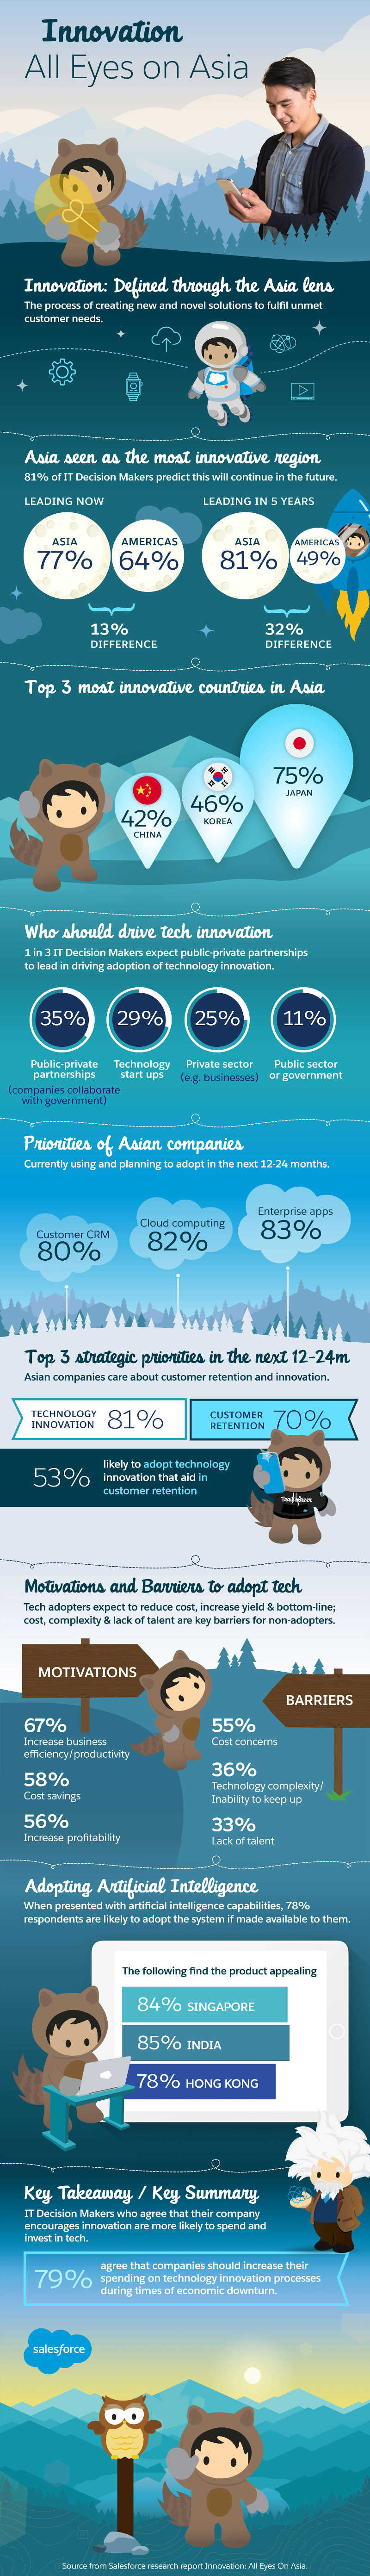 Salesforce Innovation report infographic